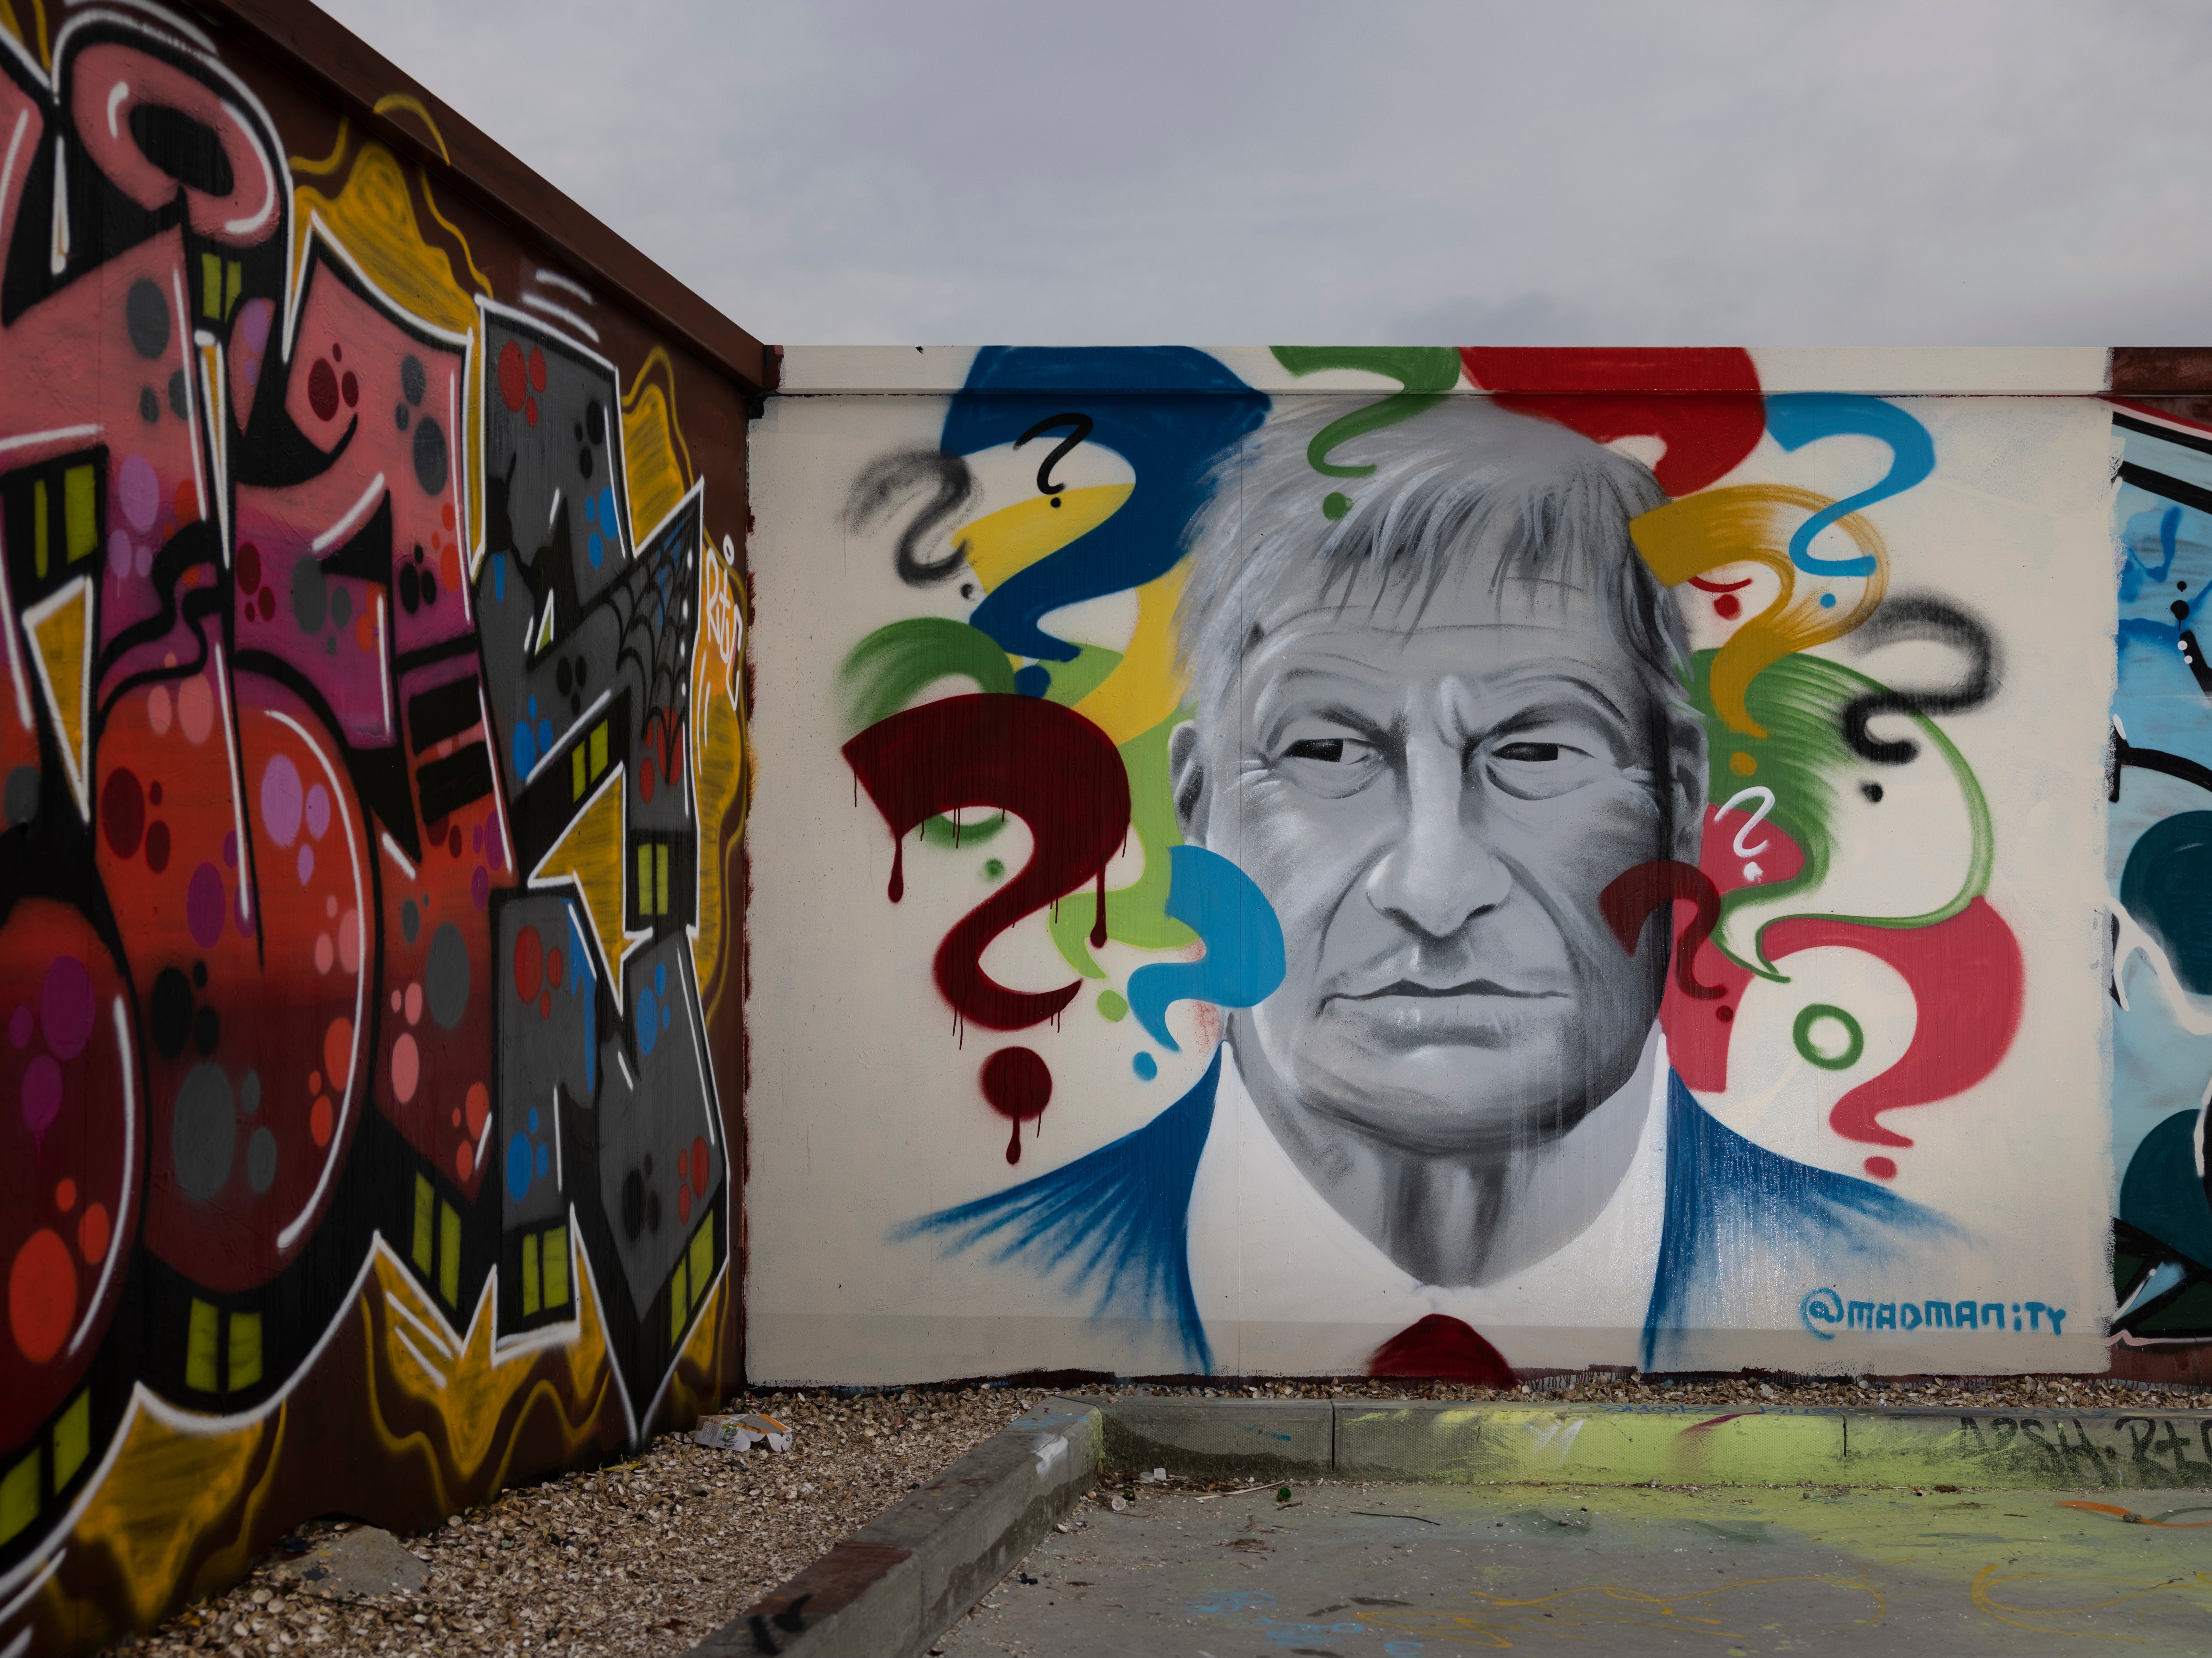 A new piece of graffiti artwork depicting the late Sir David Amess, who was killed while conducting a surgery for constituents last week, appears on a wall in Leigh-on-Sea